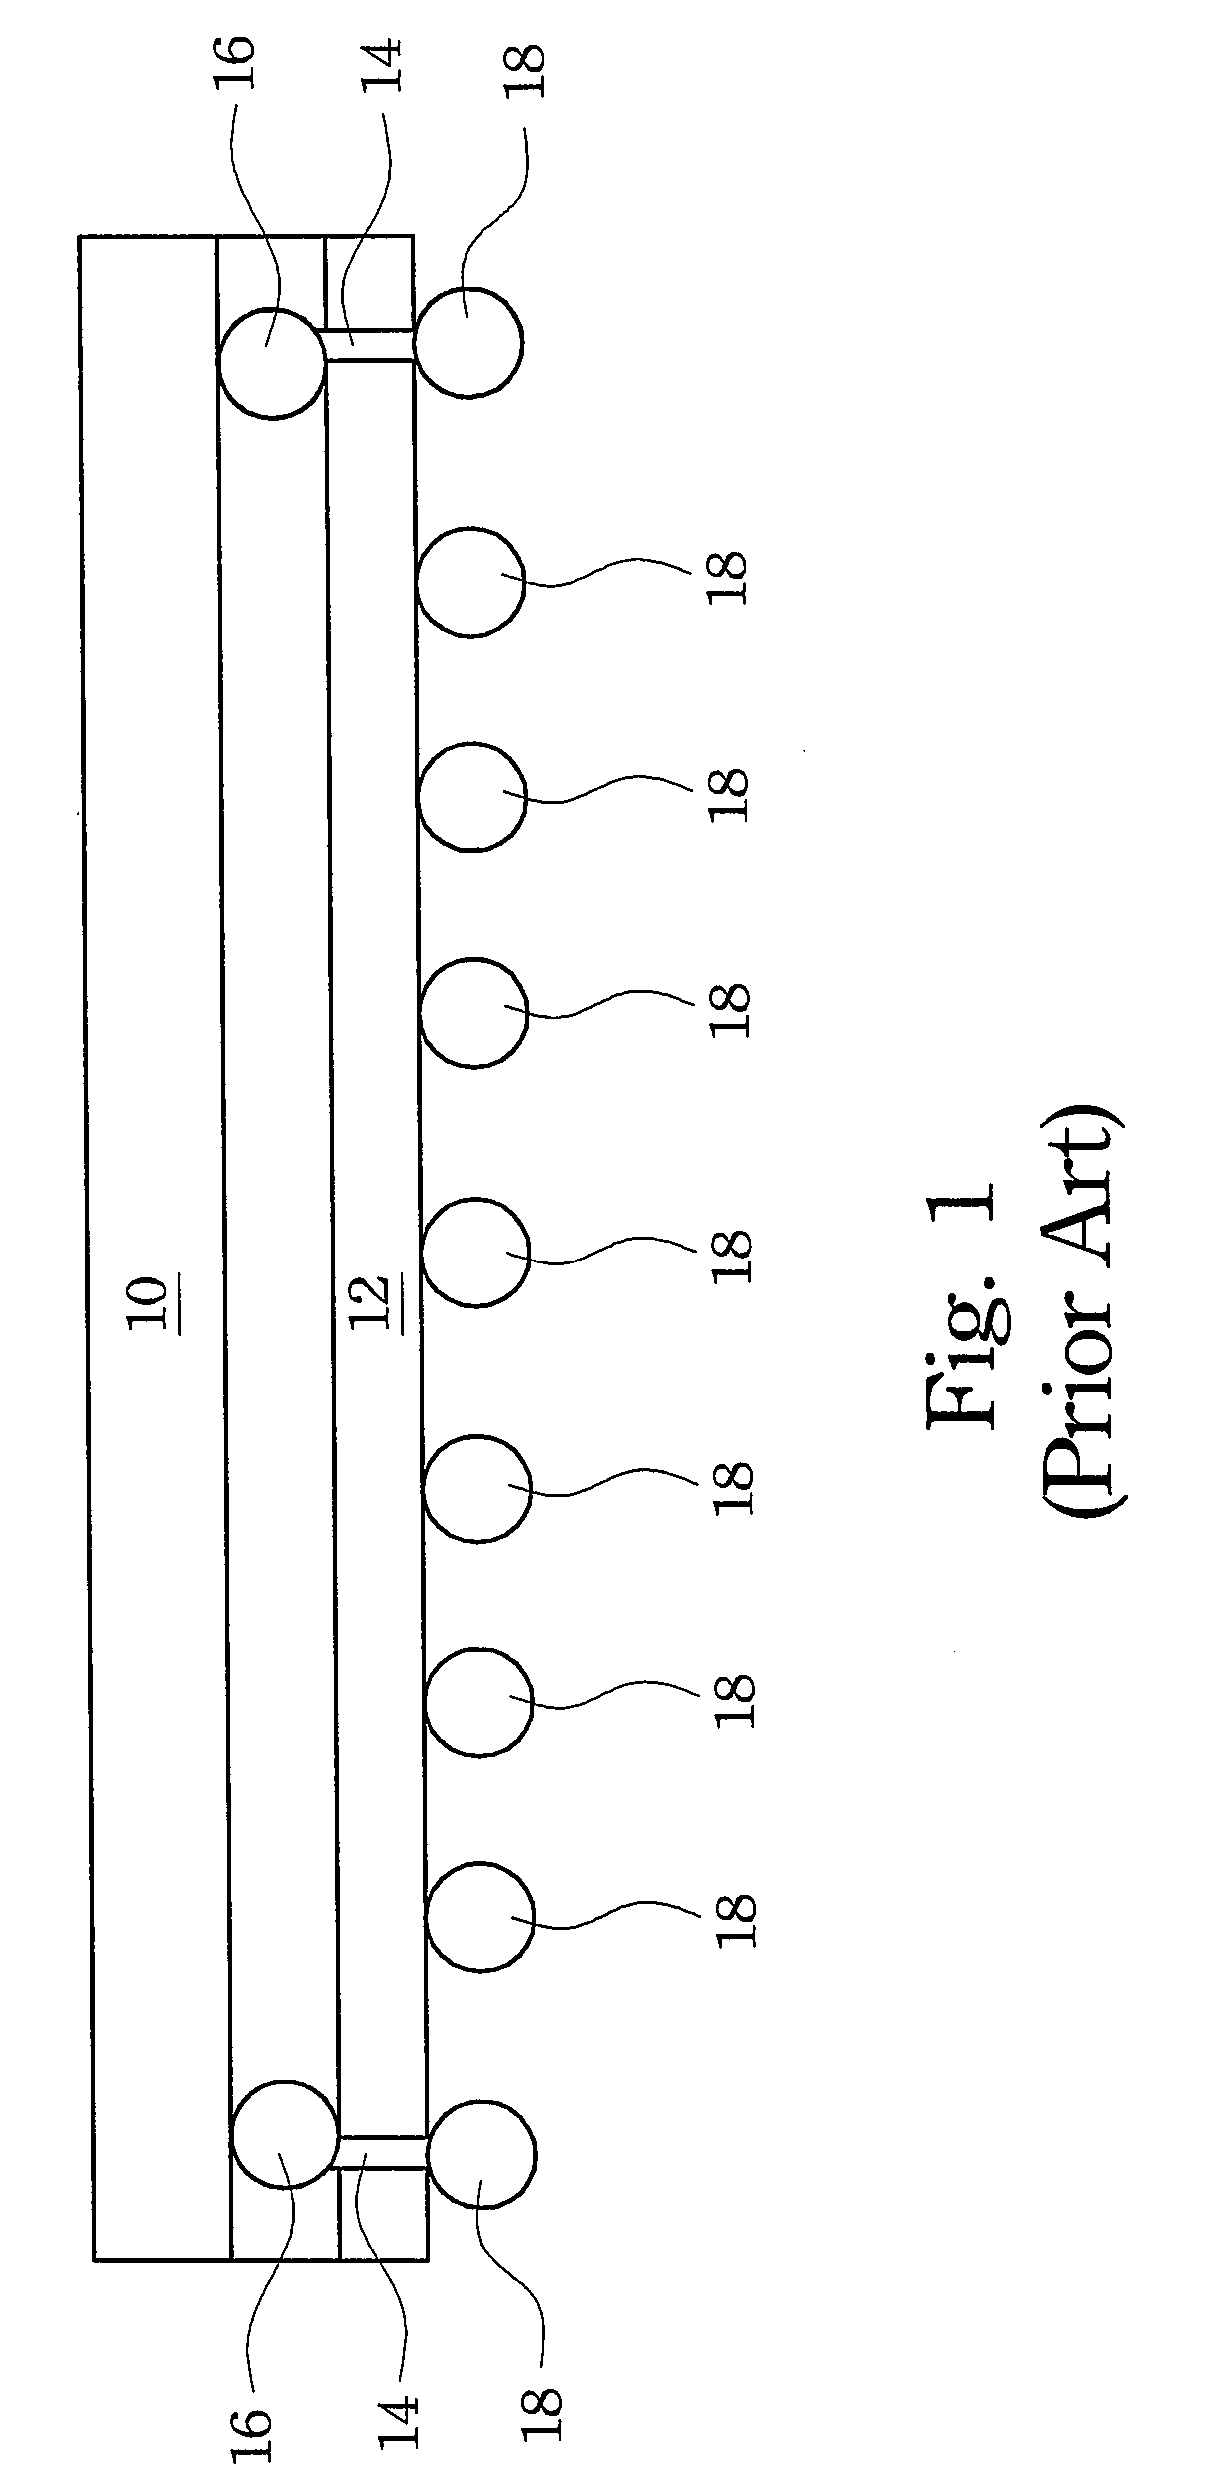 Structures for Preventing Cross-talk Between Through-Silicon Vias and Integrated Circuits